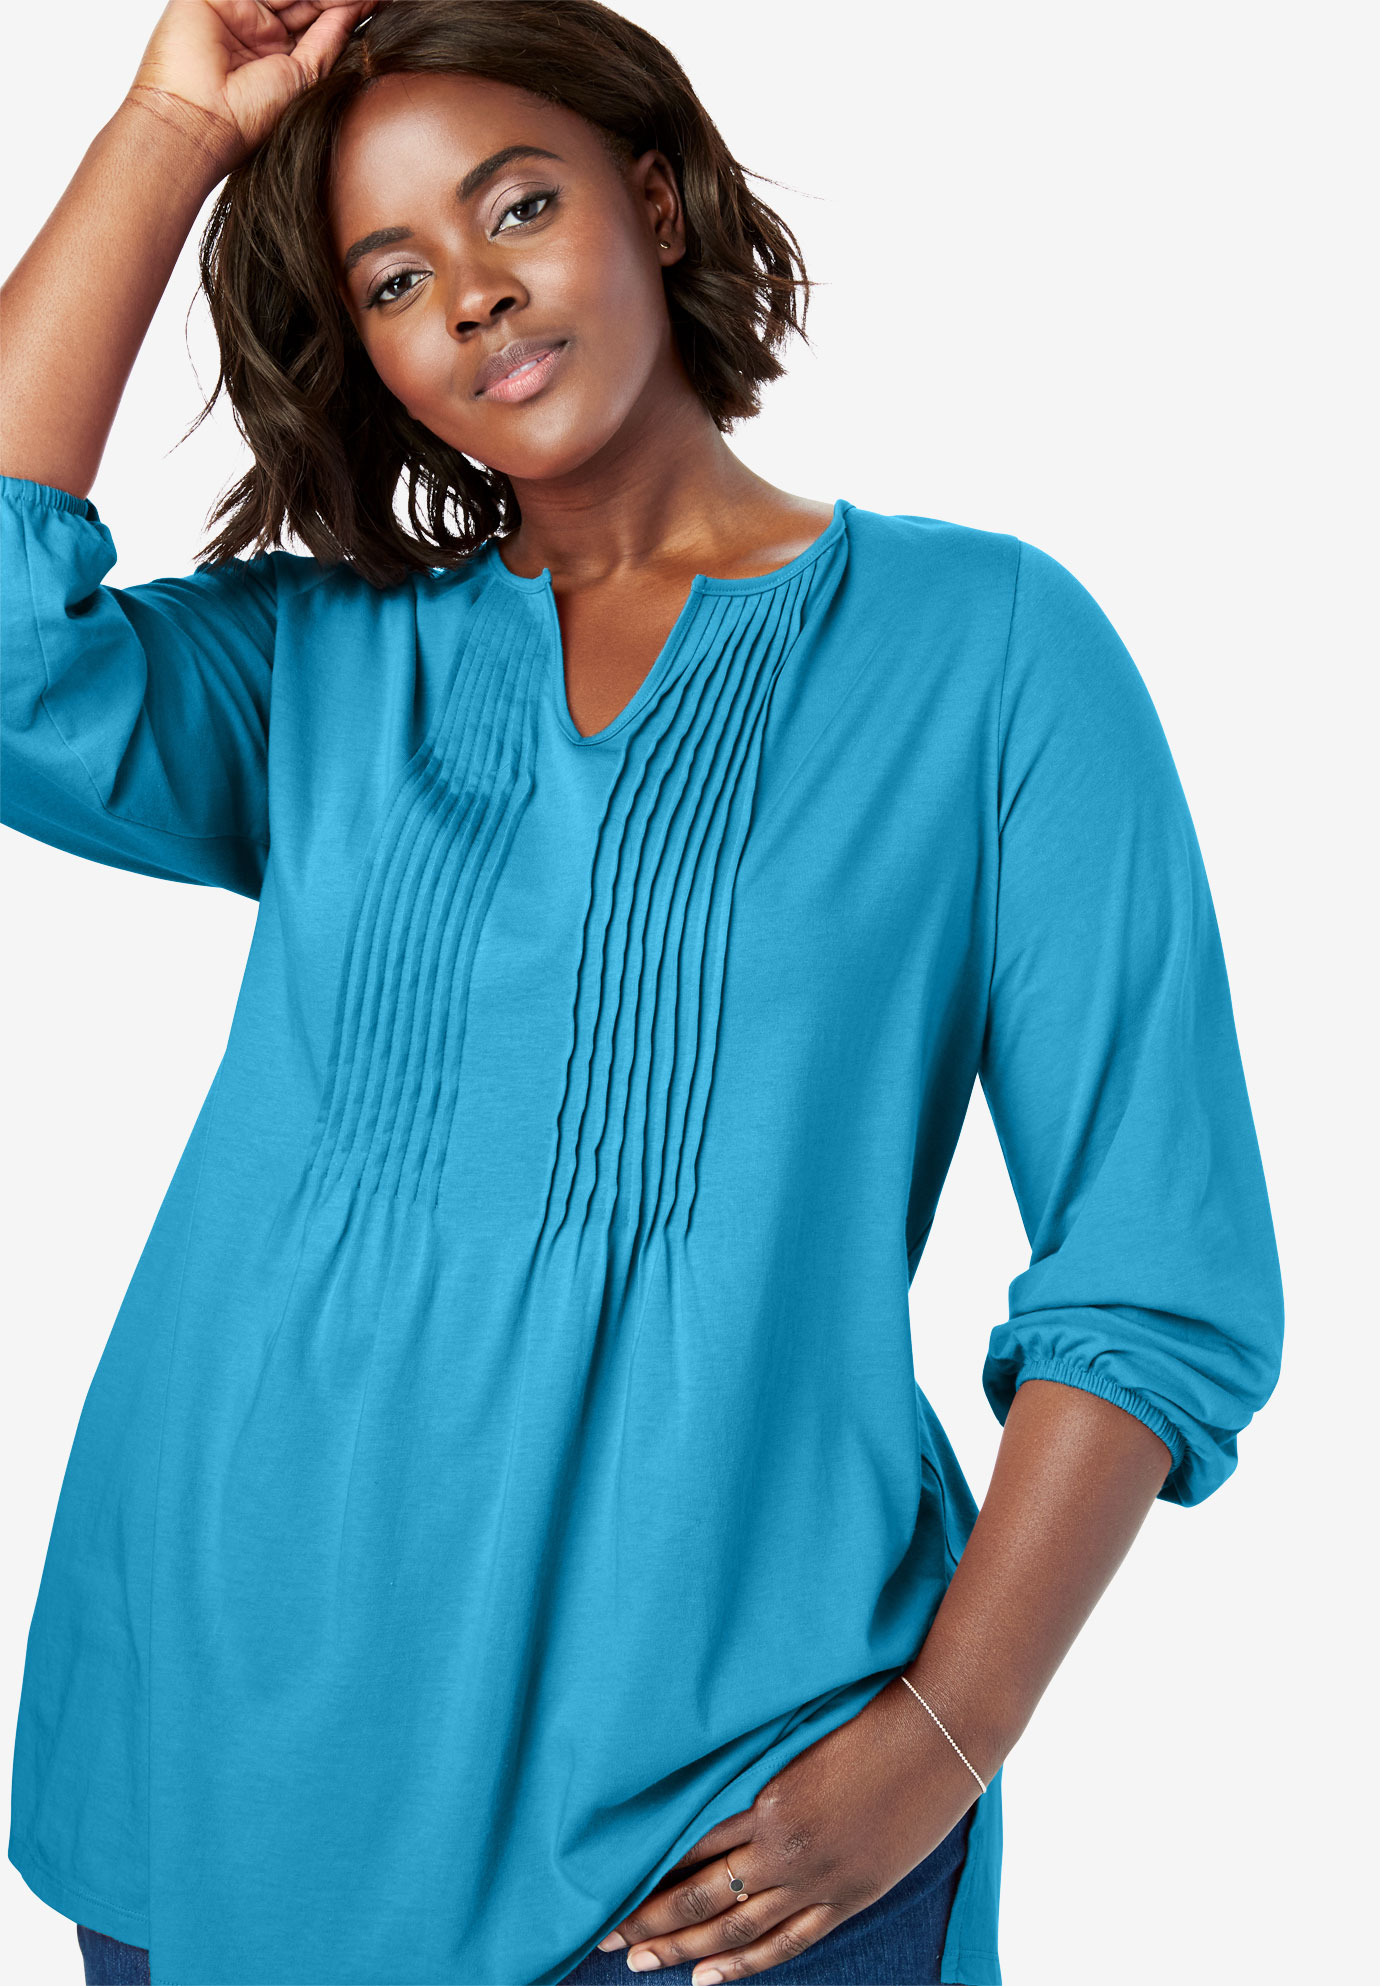 Notch Neck Pintucked Tunic| Plus Size Tops | Woman Within